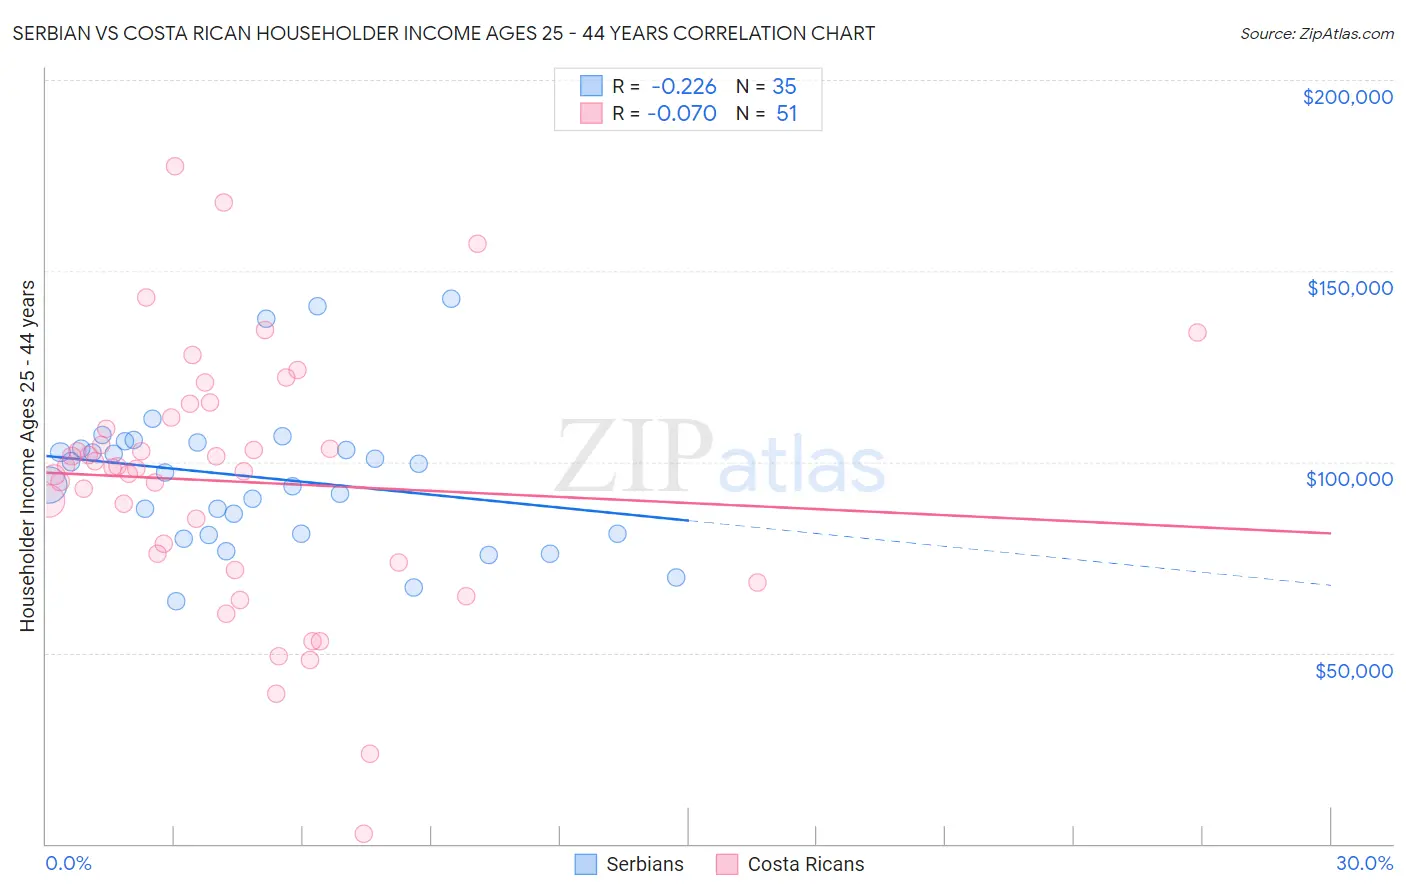 Serbian vs Costa Rican Householder Income Ages 25 - 44 years